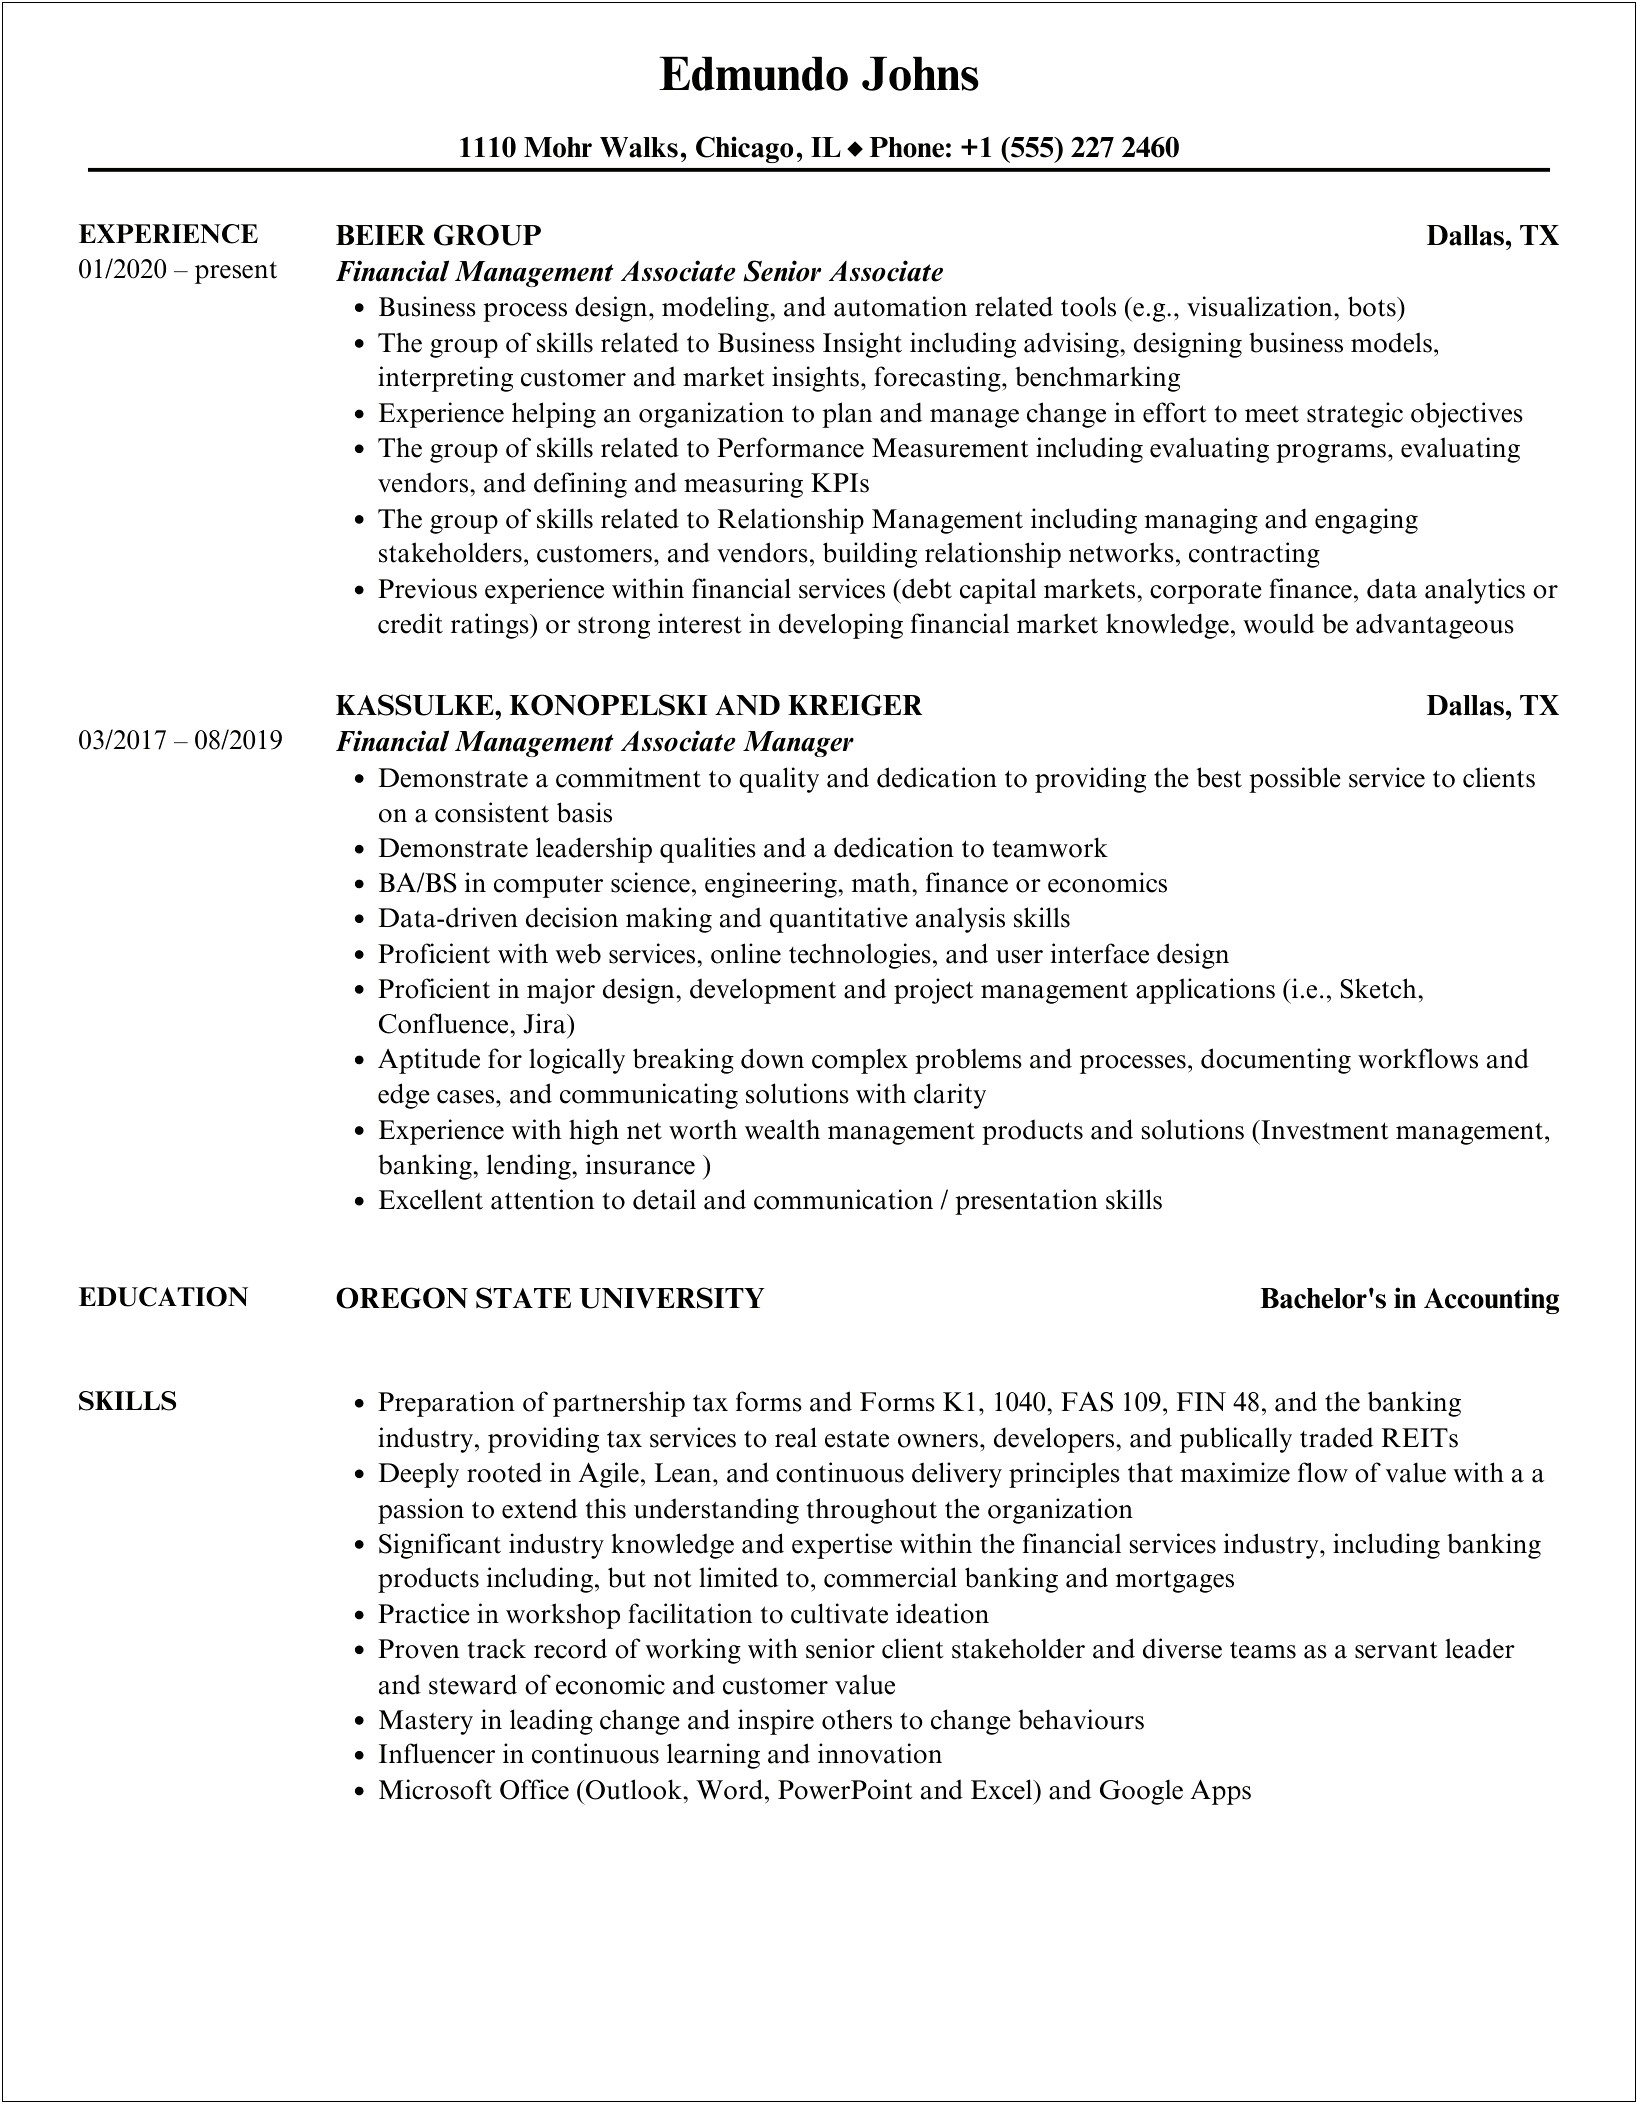 Federal Financial Management Associate Budgeting Certificate On Resume